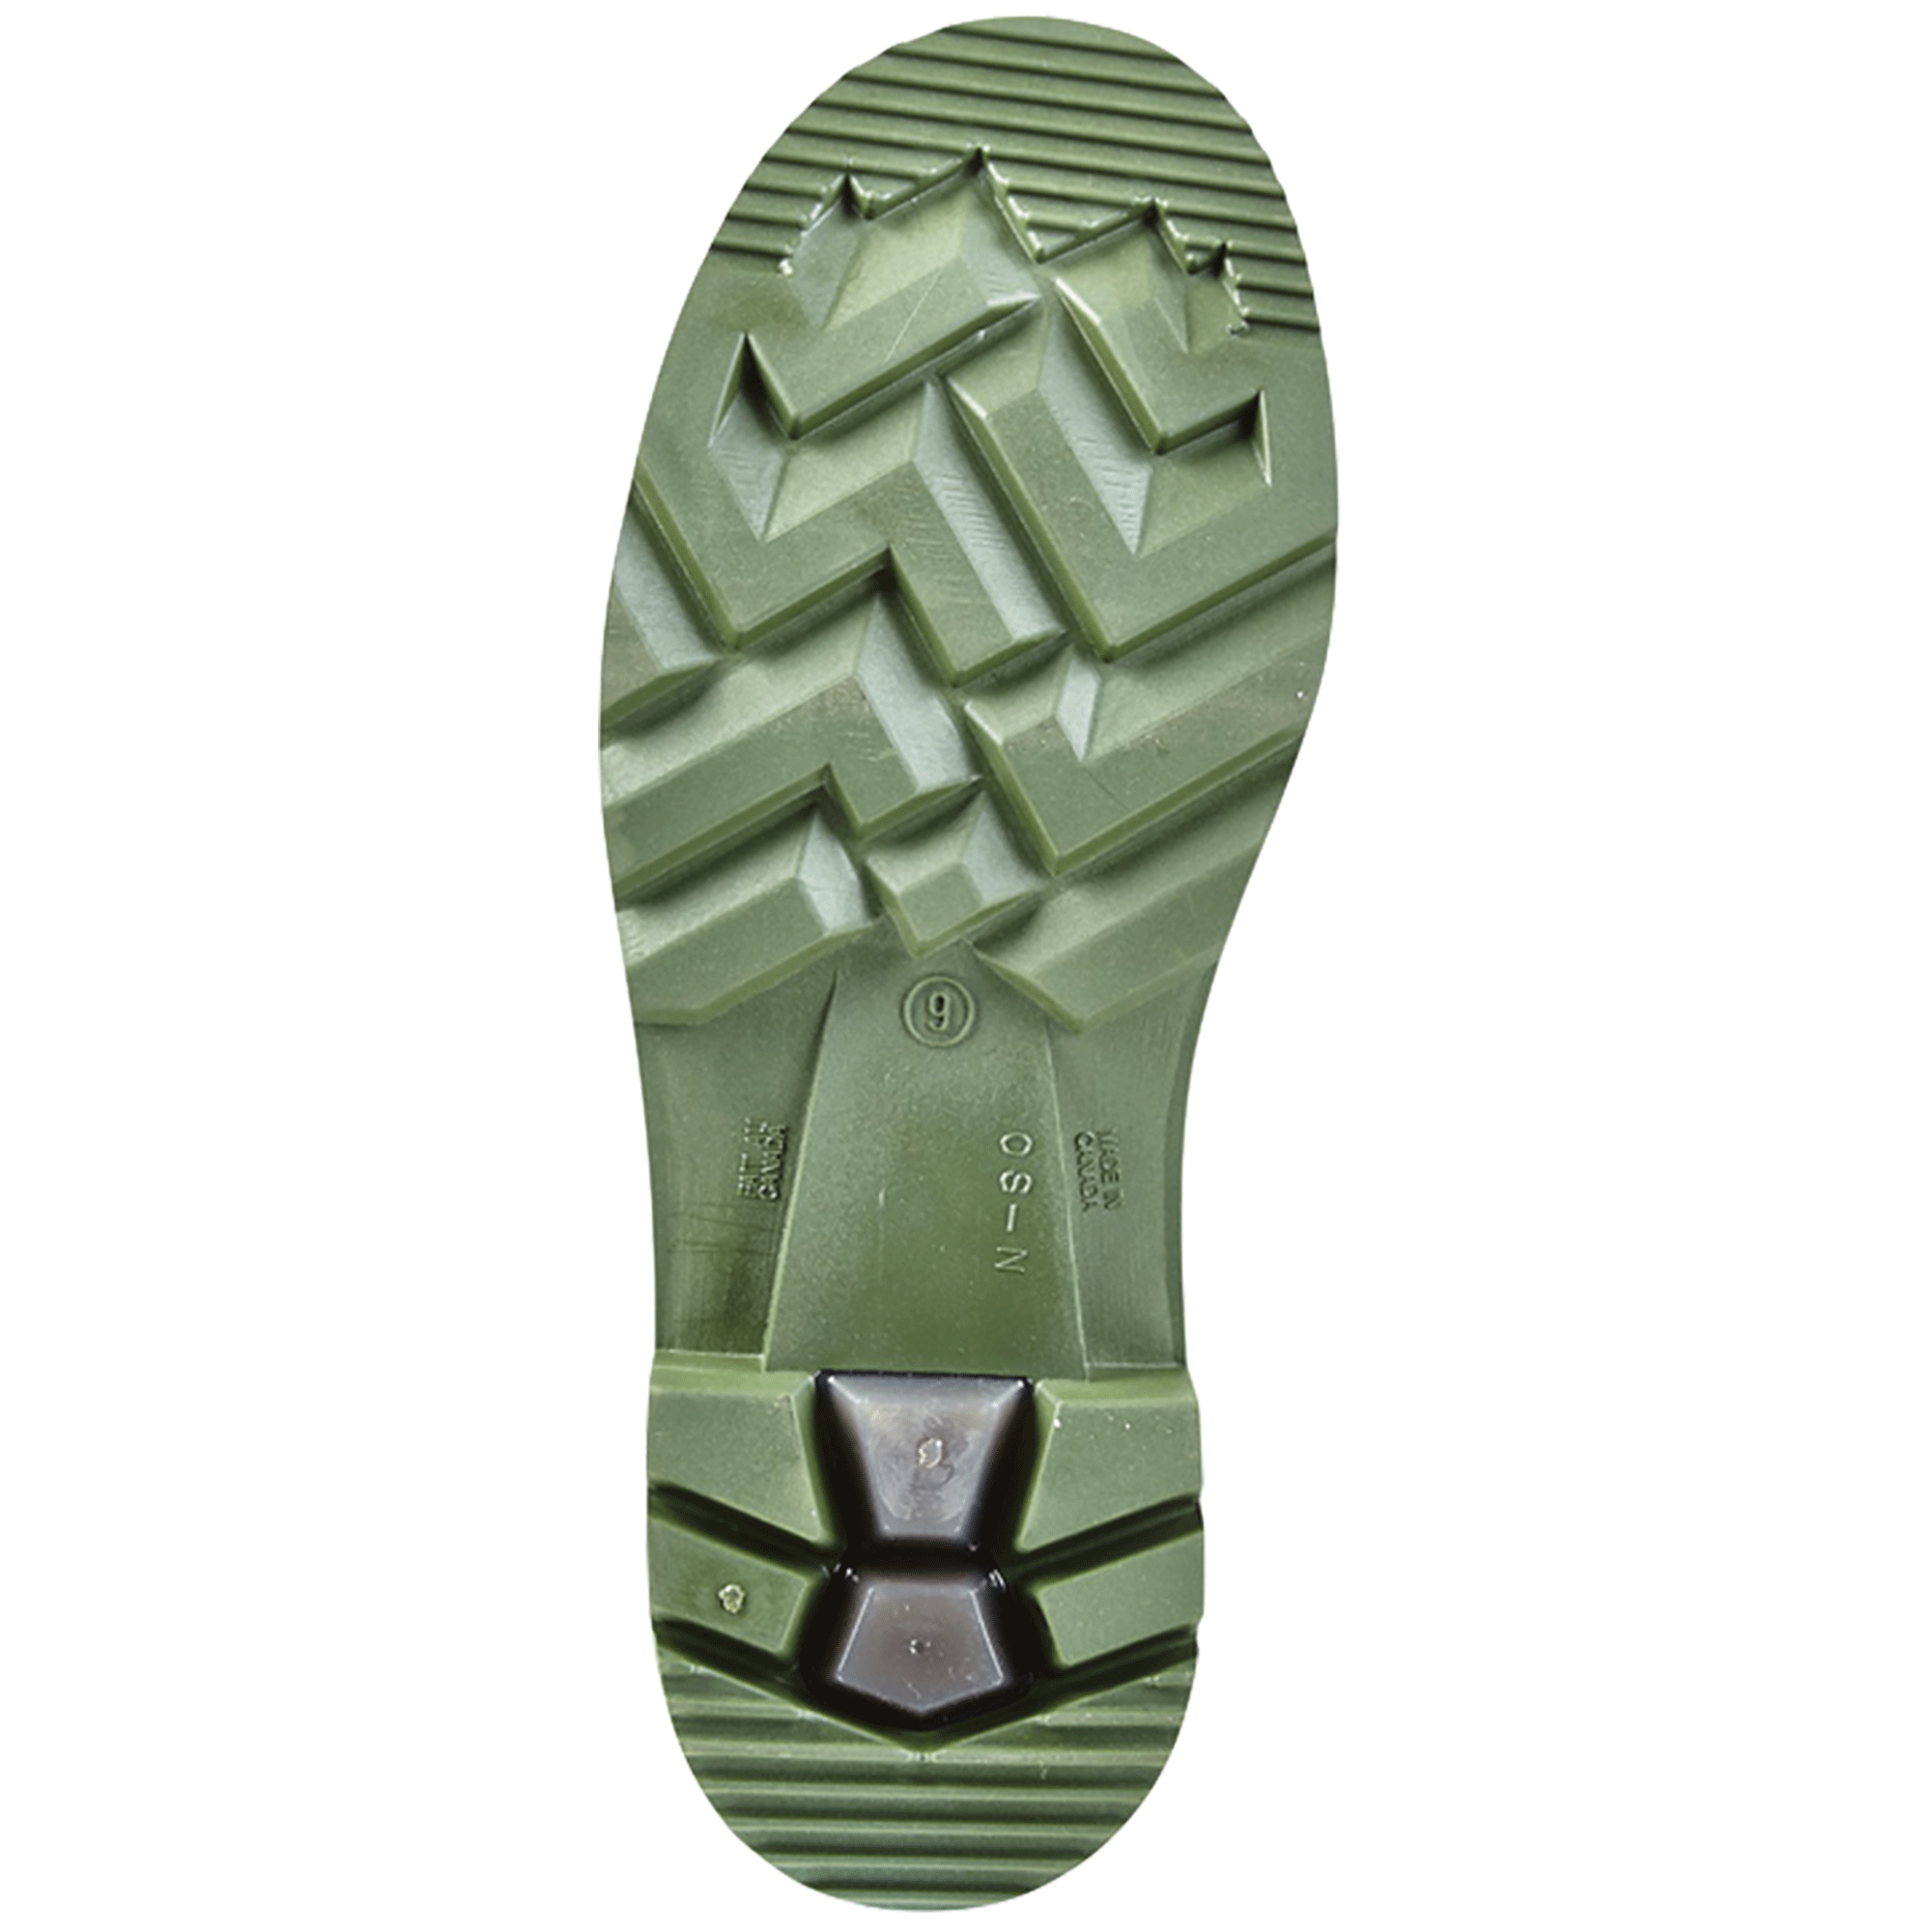 ENDURO (Safety Toe & Plate) | Men's Boot